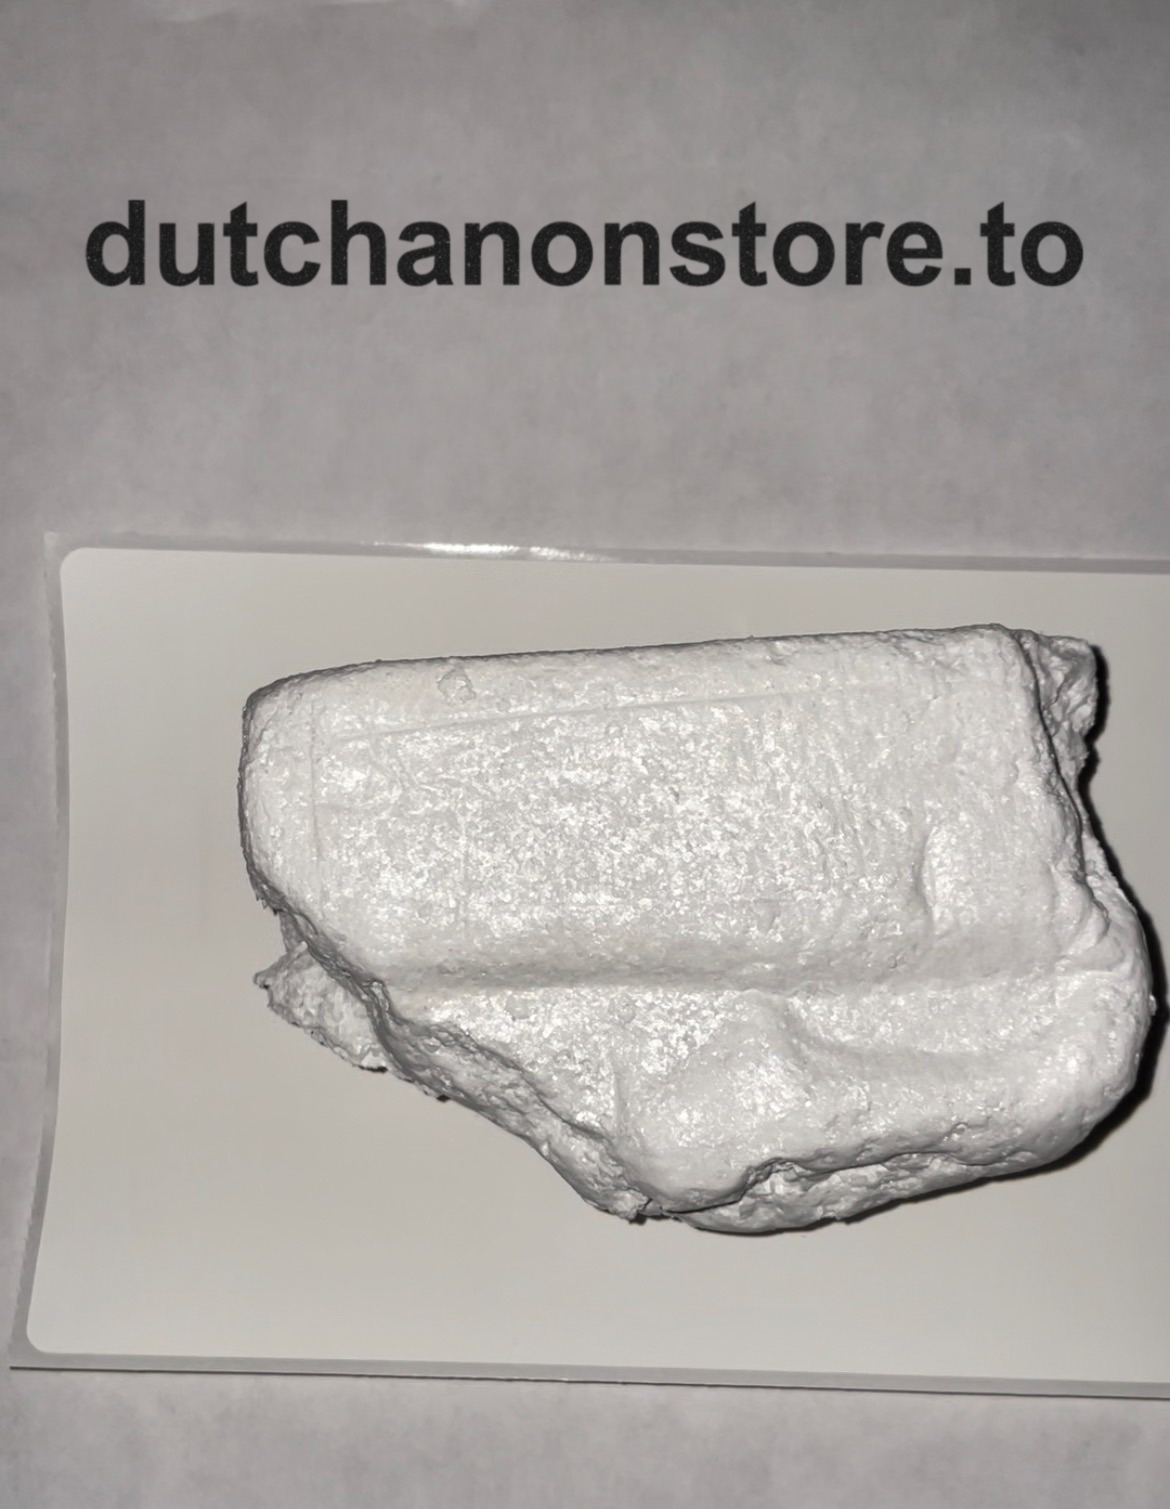 3.5g-500g COLOMBIAN COCAINE 98% (US 2 US) Image